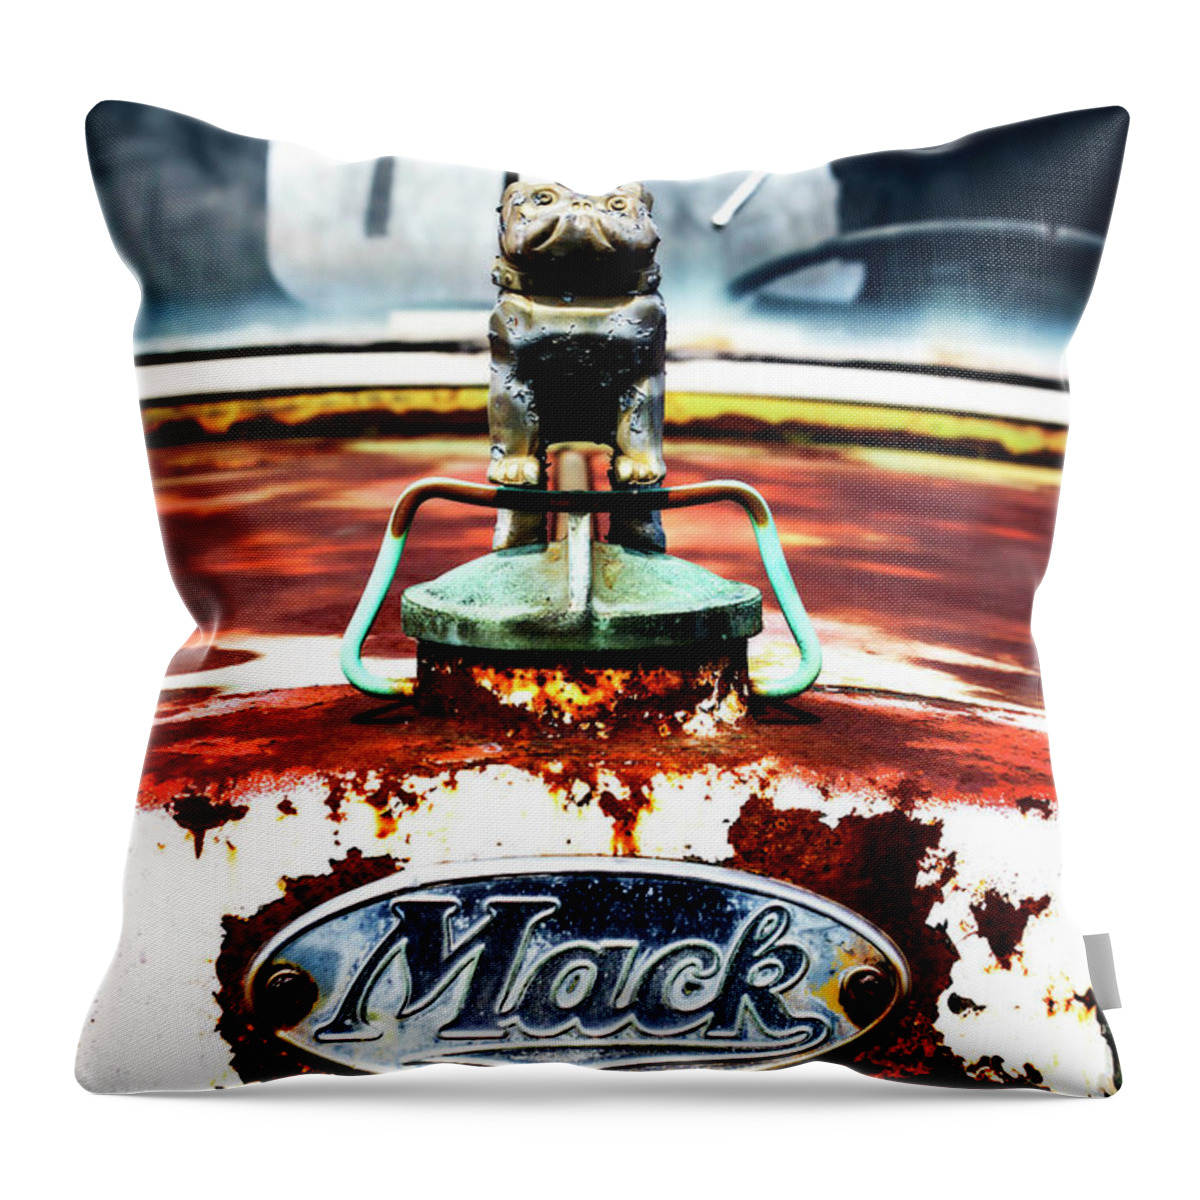 Color Throw Pillow featuring the photograph Rusty Old Truck -4 by Alan Hausenflock